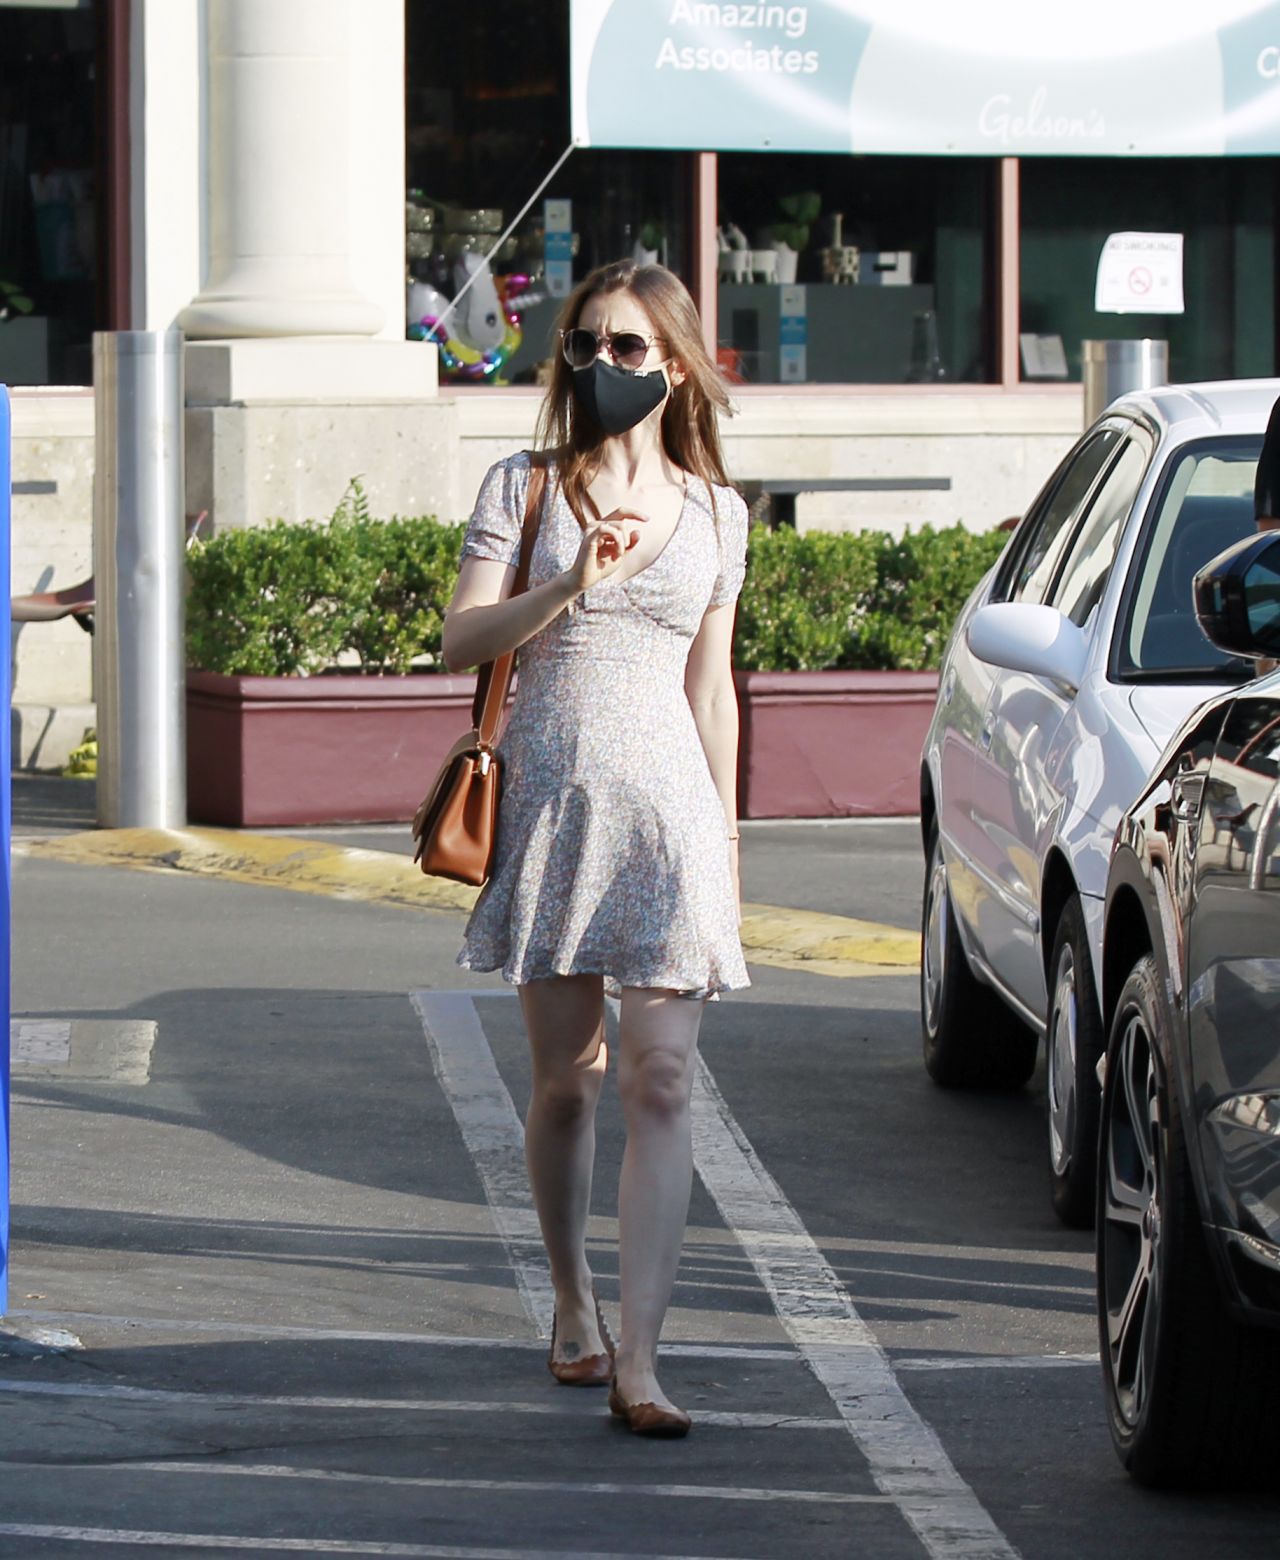 lily-collins-shopping-in-la-10-16-2020-5.jpg